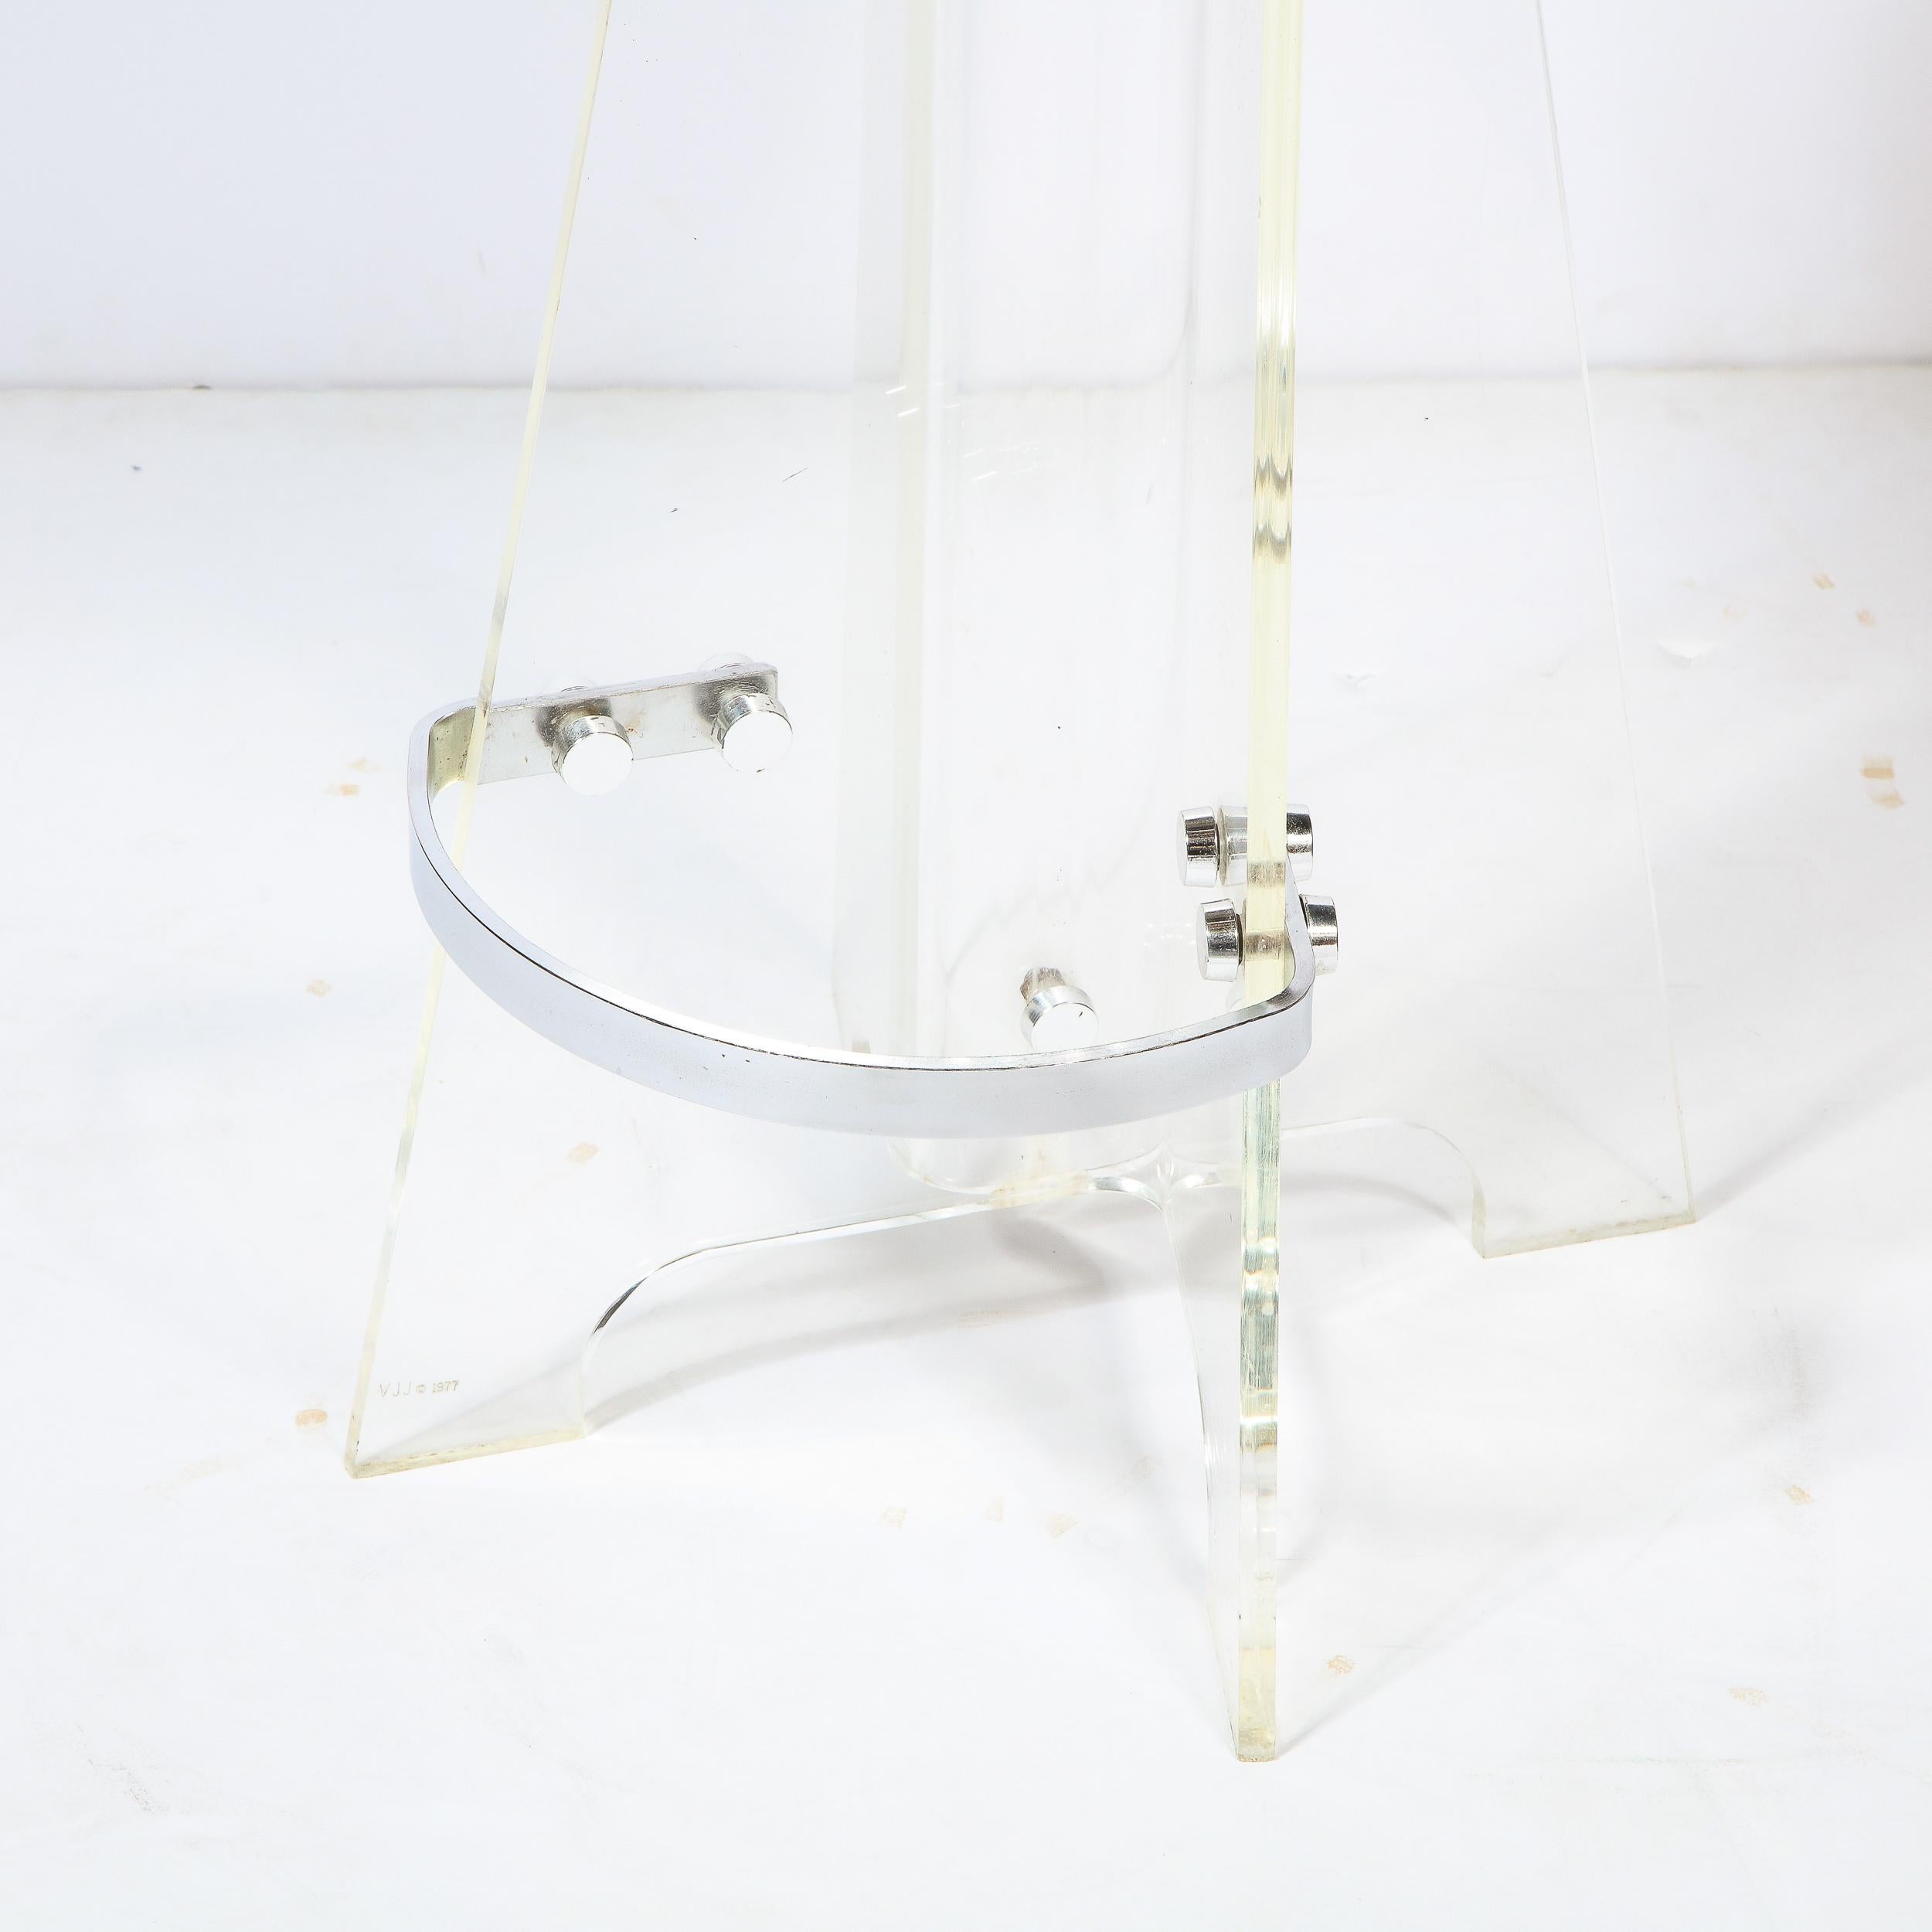 Late 20th Century Pair of Mid-Century Modern Lucite, Chrome Bar Stools in Holly Hunt Upholstery For Sale